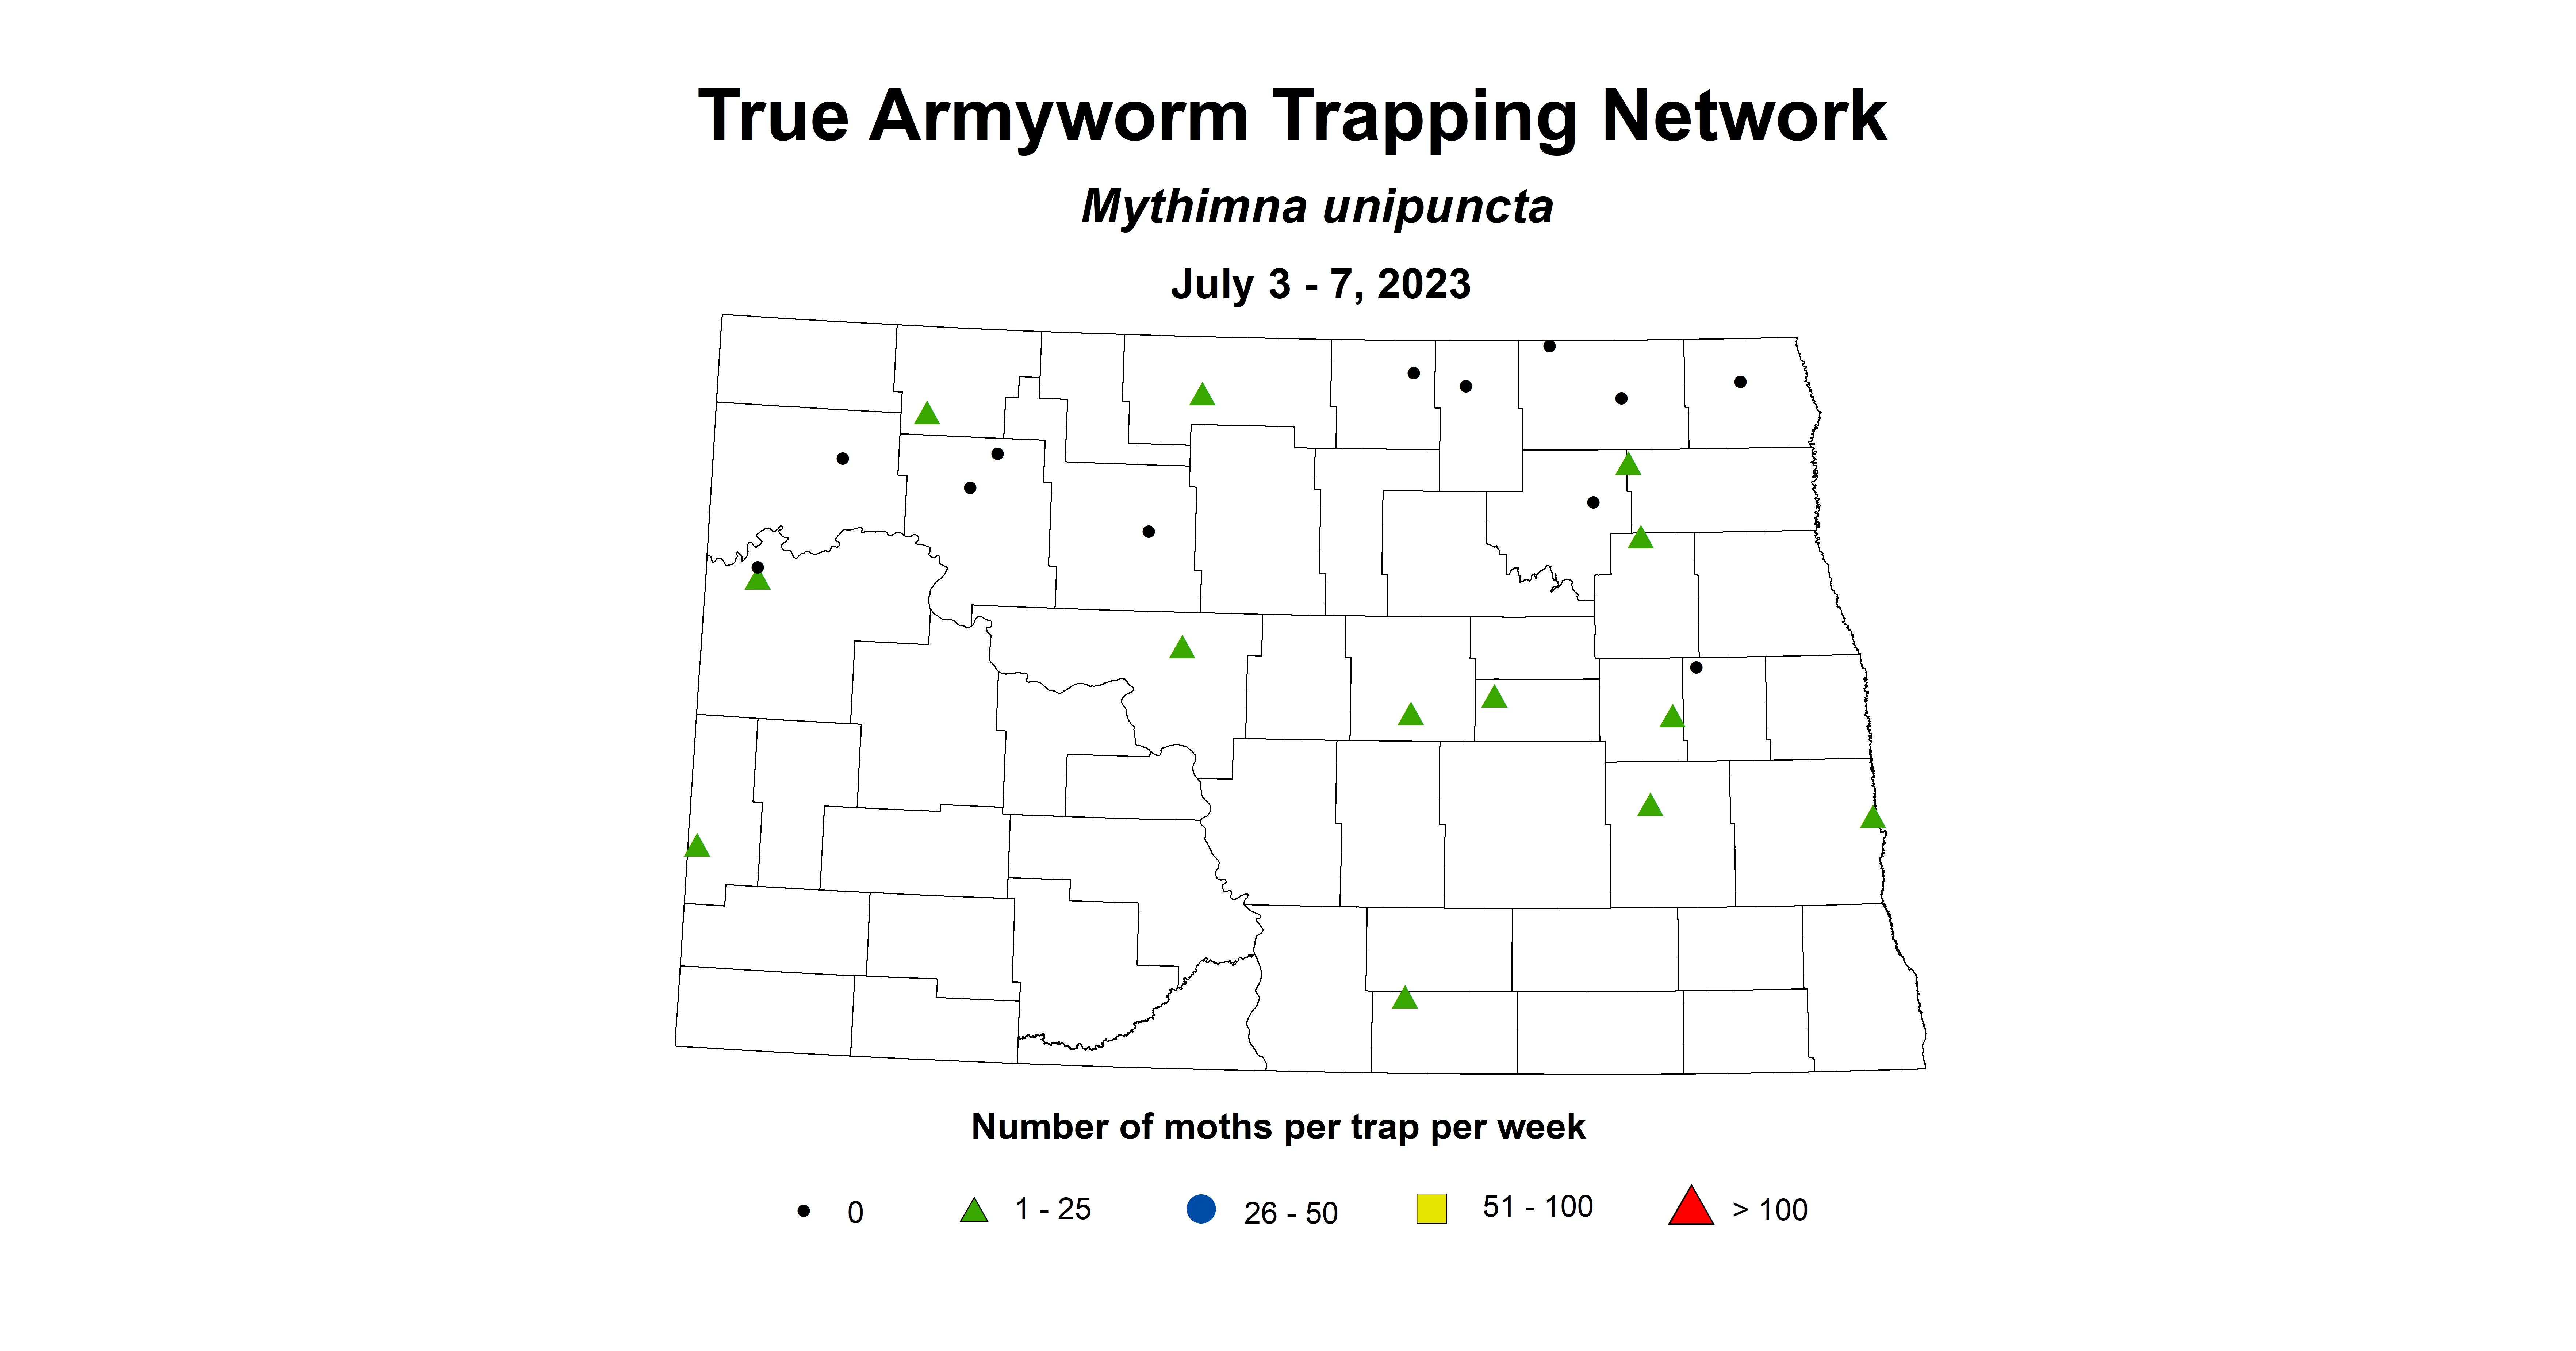 wheat insect trap true armyworm July 3-7 2023